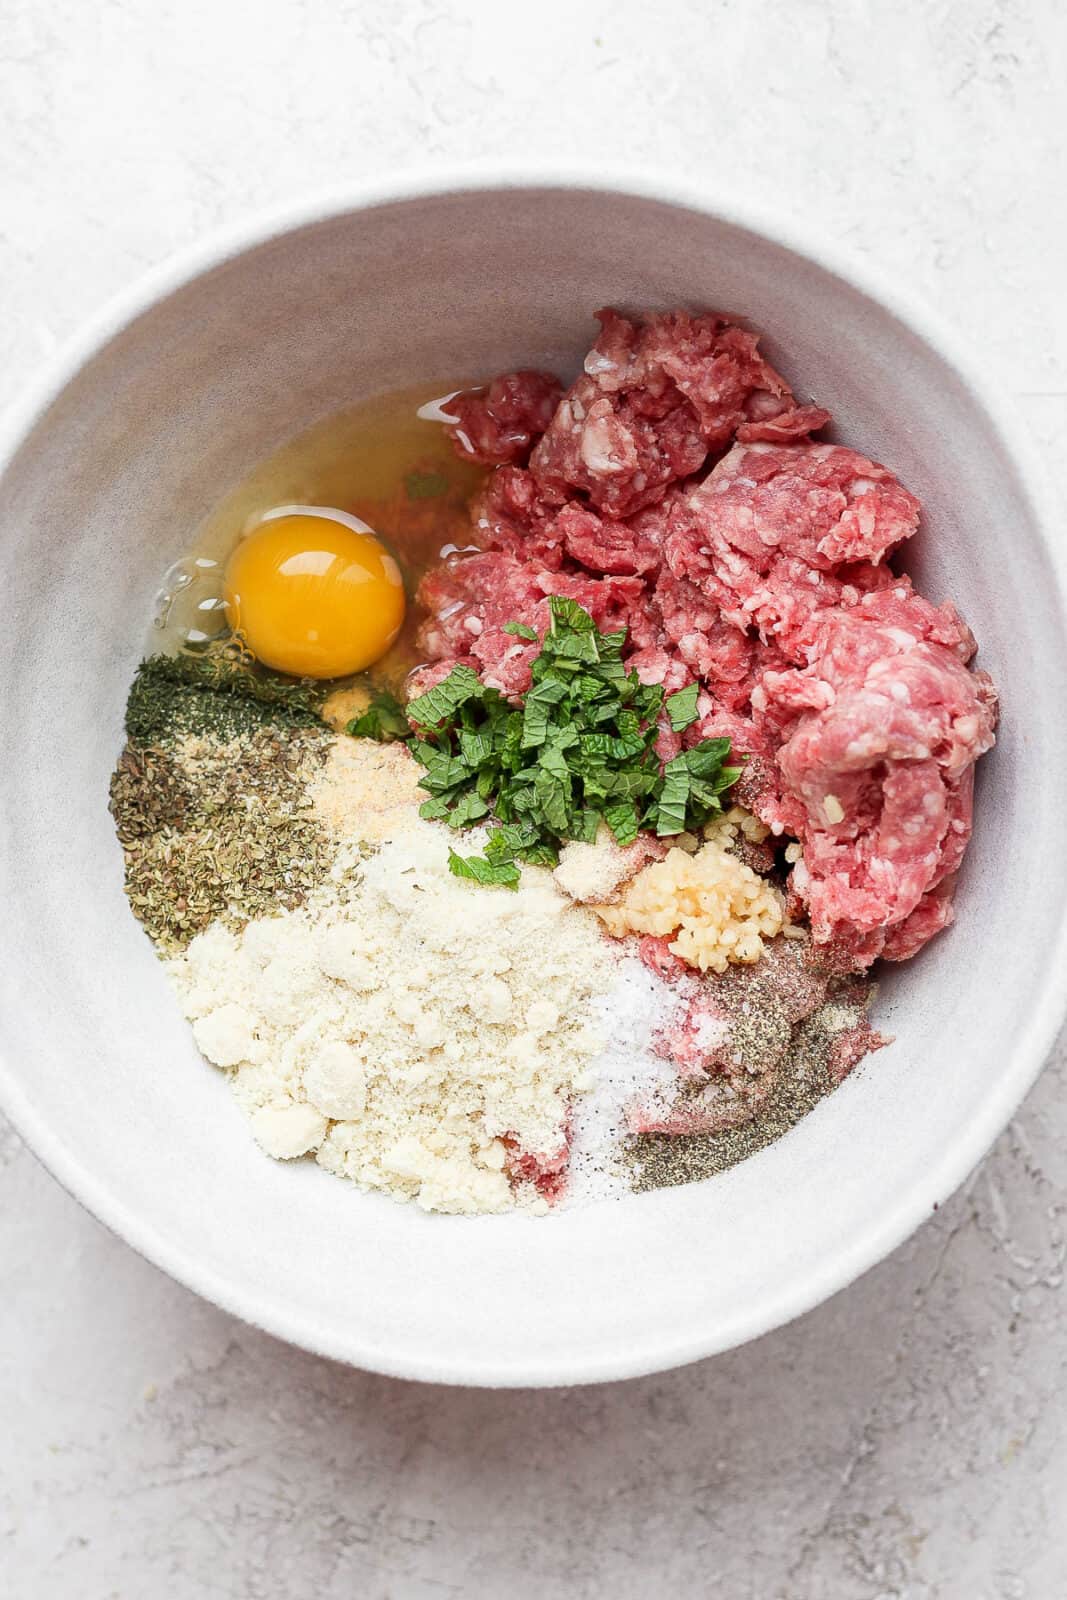 A bowl filed with lamb meatball ingredients.